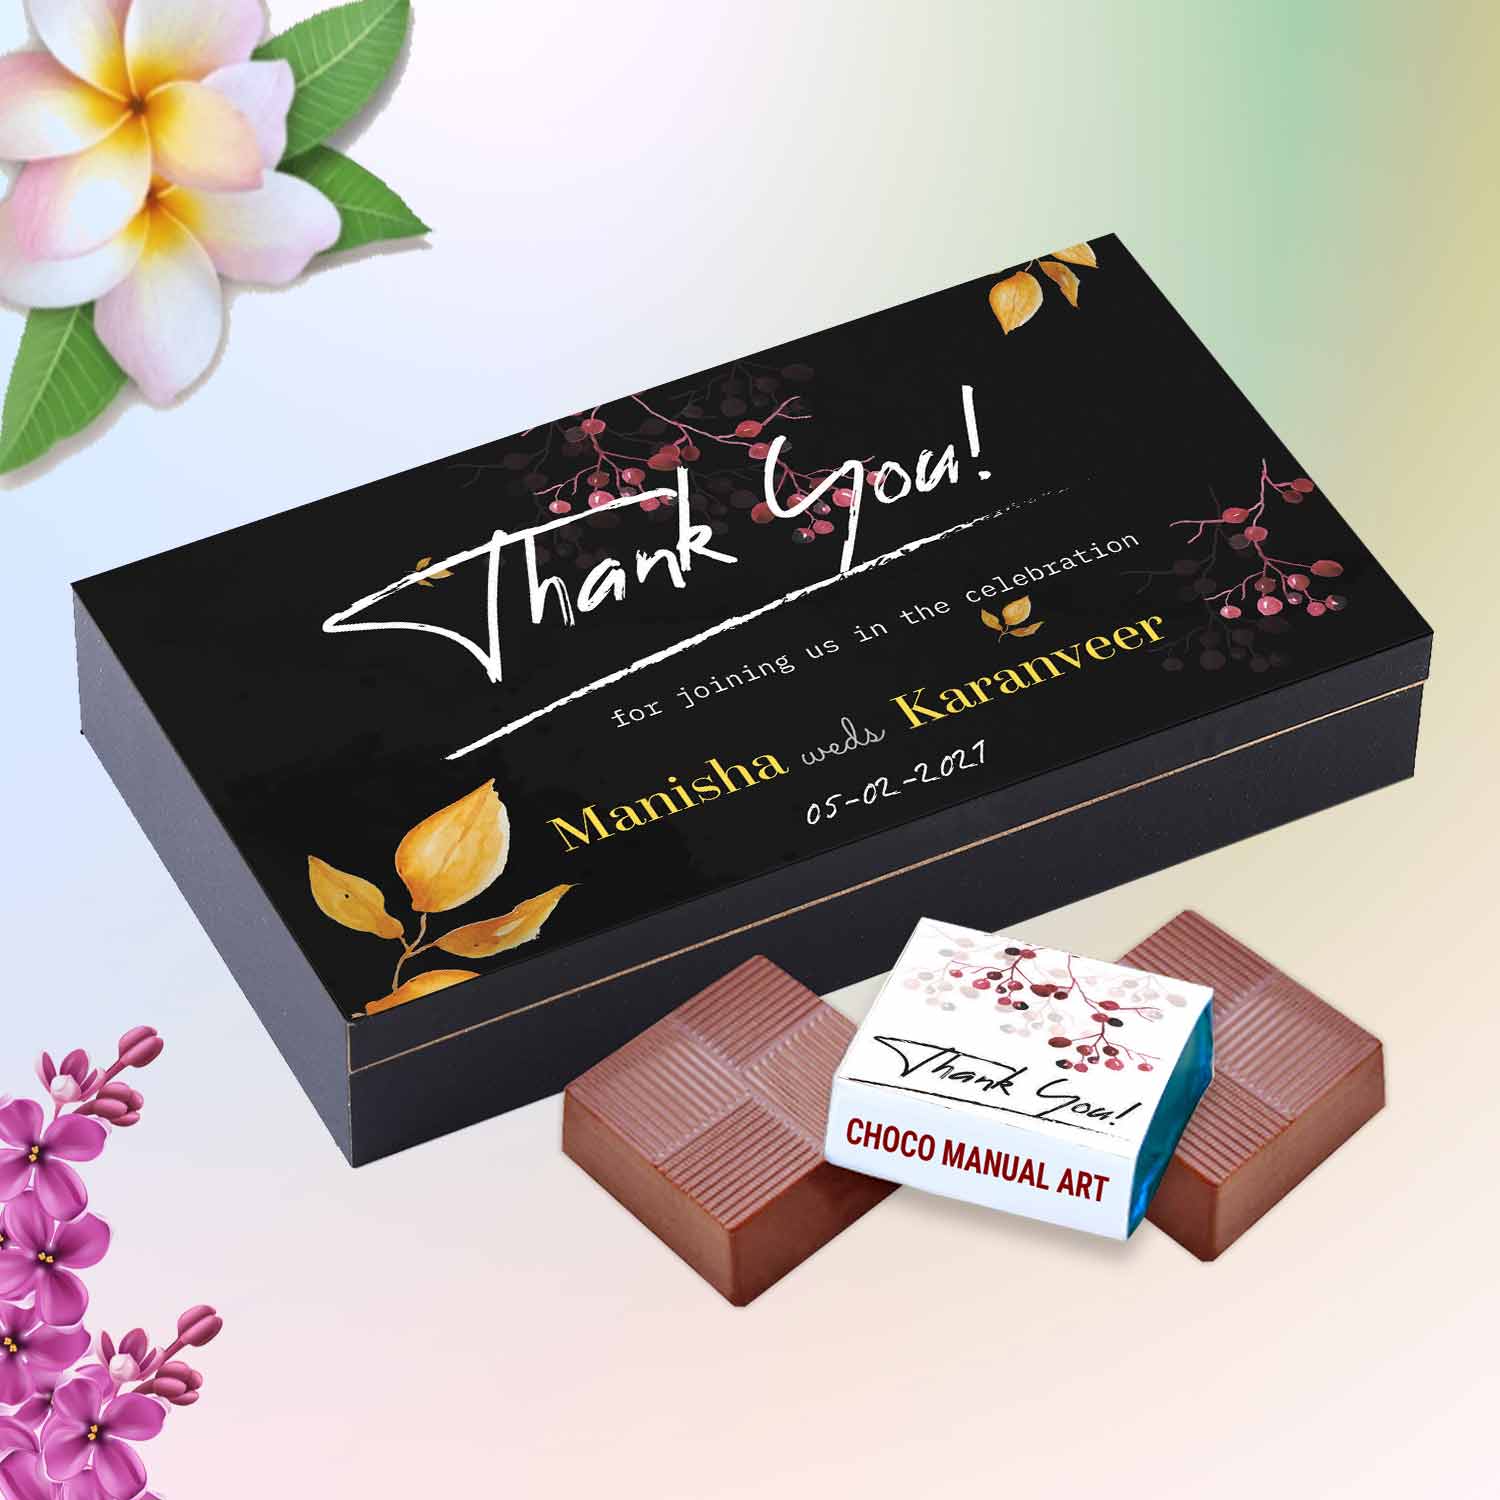 Everyone loves chocolates! Chocolates are perhaps the most widely accepted gift. Surprise them with the name printed on chocolates